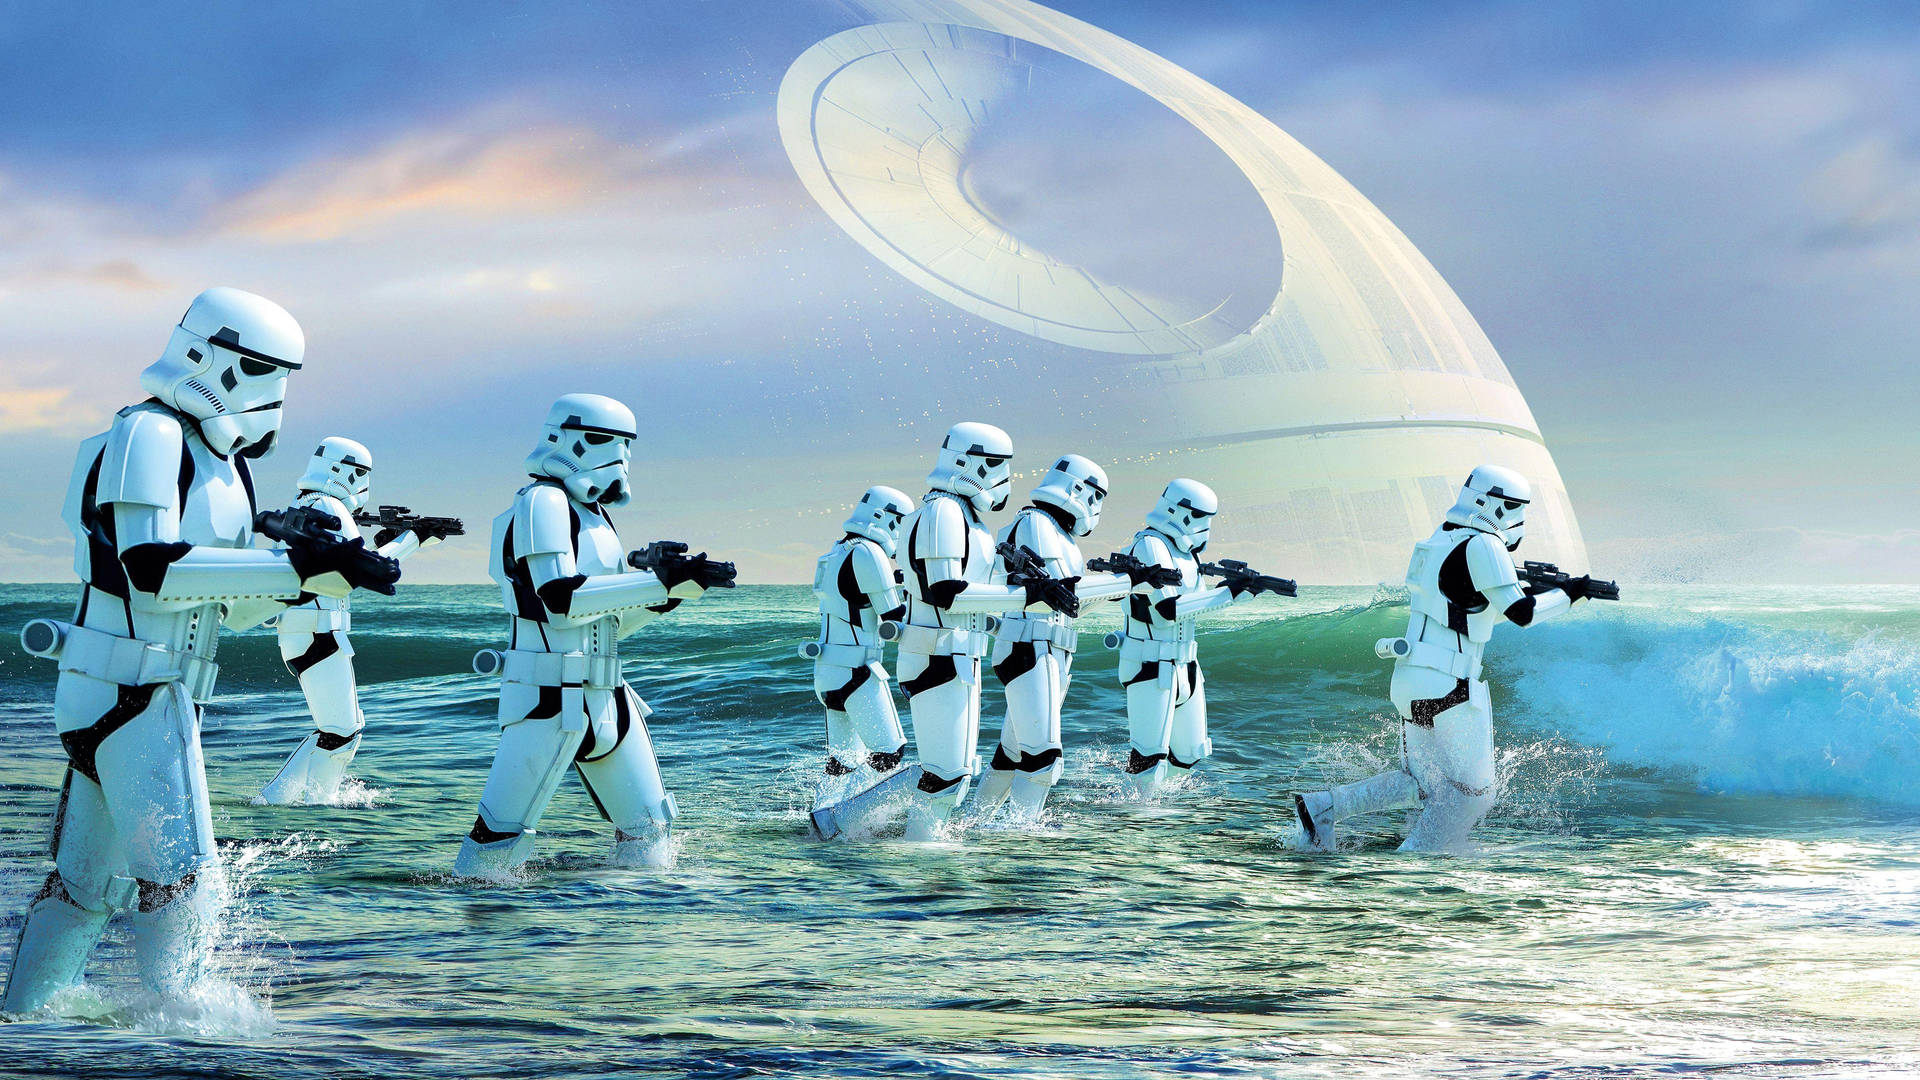 4k Star Wars Rogue One Stormtroopers Background